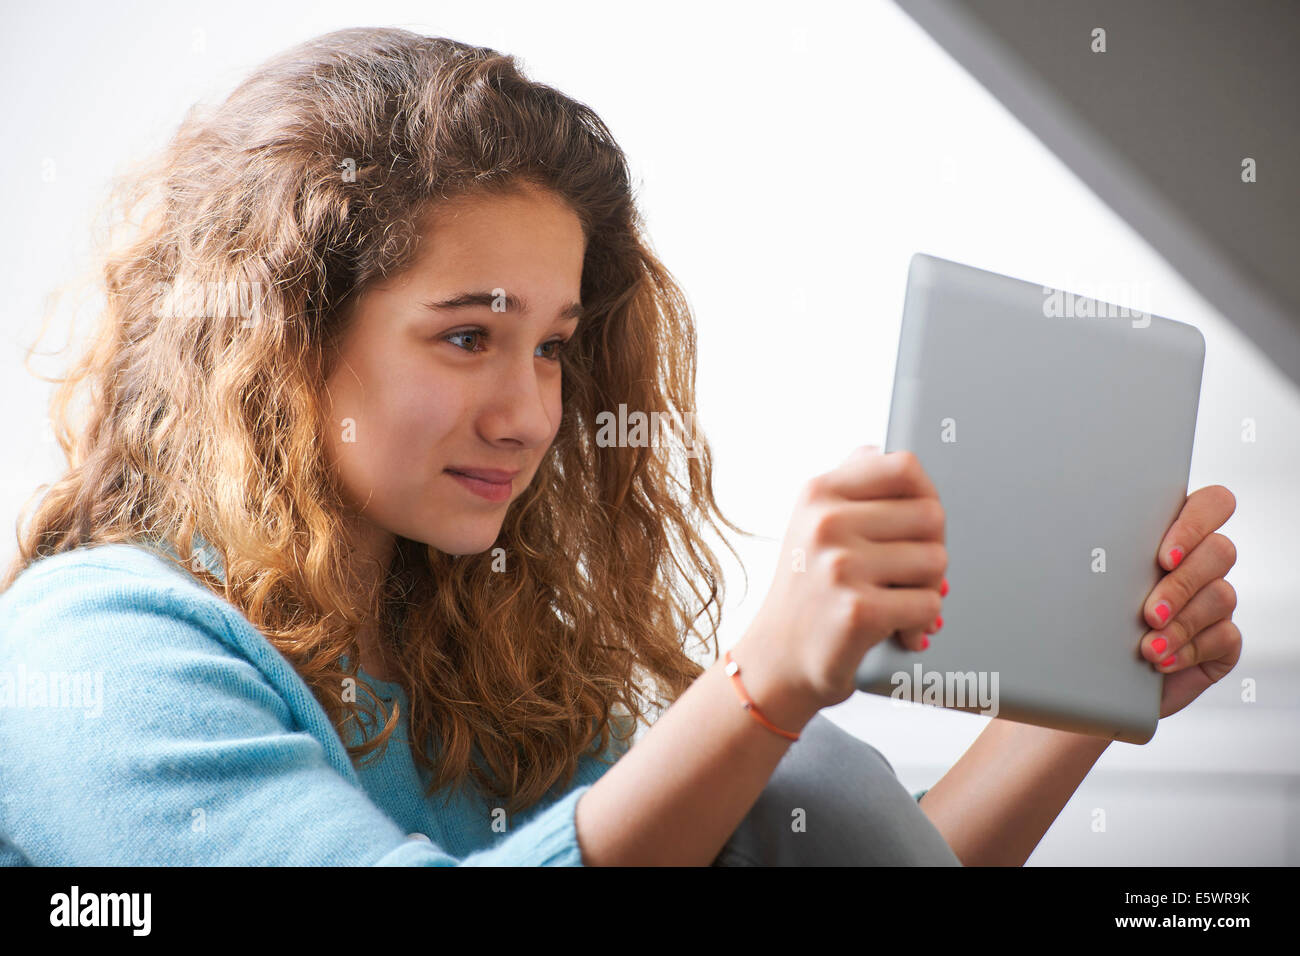 Young girl using digital tablet Stock Photo